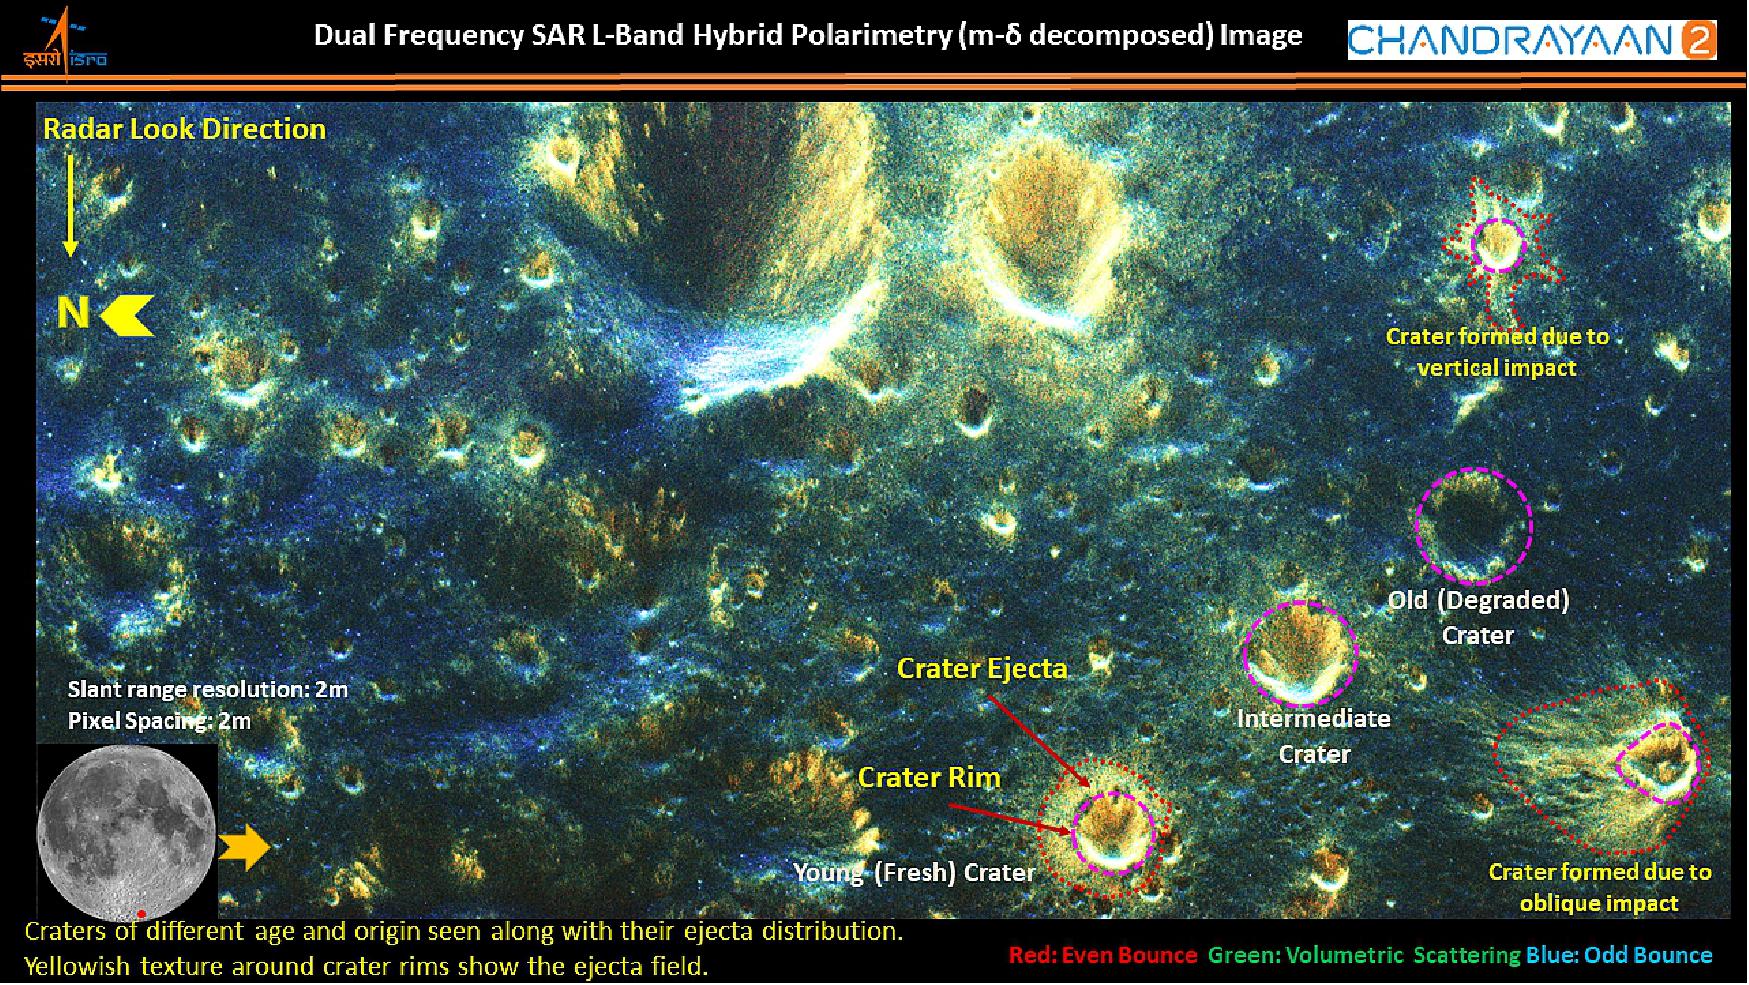 Figure 15: A m-δ decomposition image from the first datasets acquired over lunar south polar regions in L-band high-resolution (2 m slant-range resolution) hybrid polarimetric mode (image credit: ISRO)